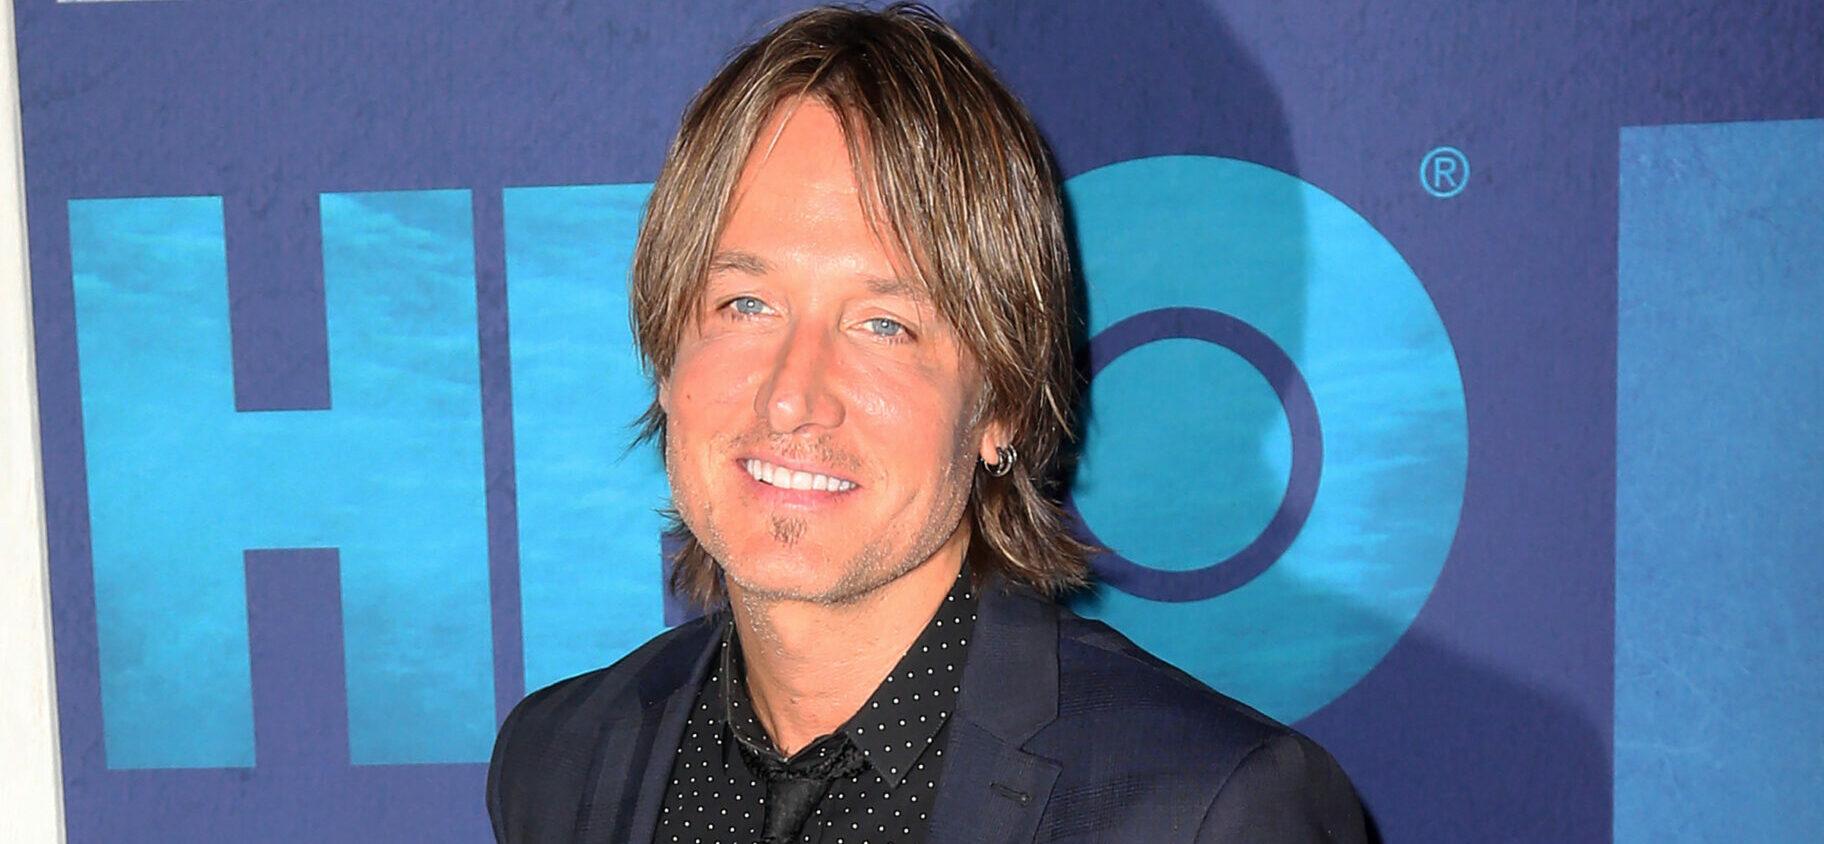 Keith Urban at the 'Big Little Lies' Season 2 Premiere in New York City